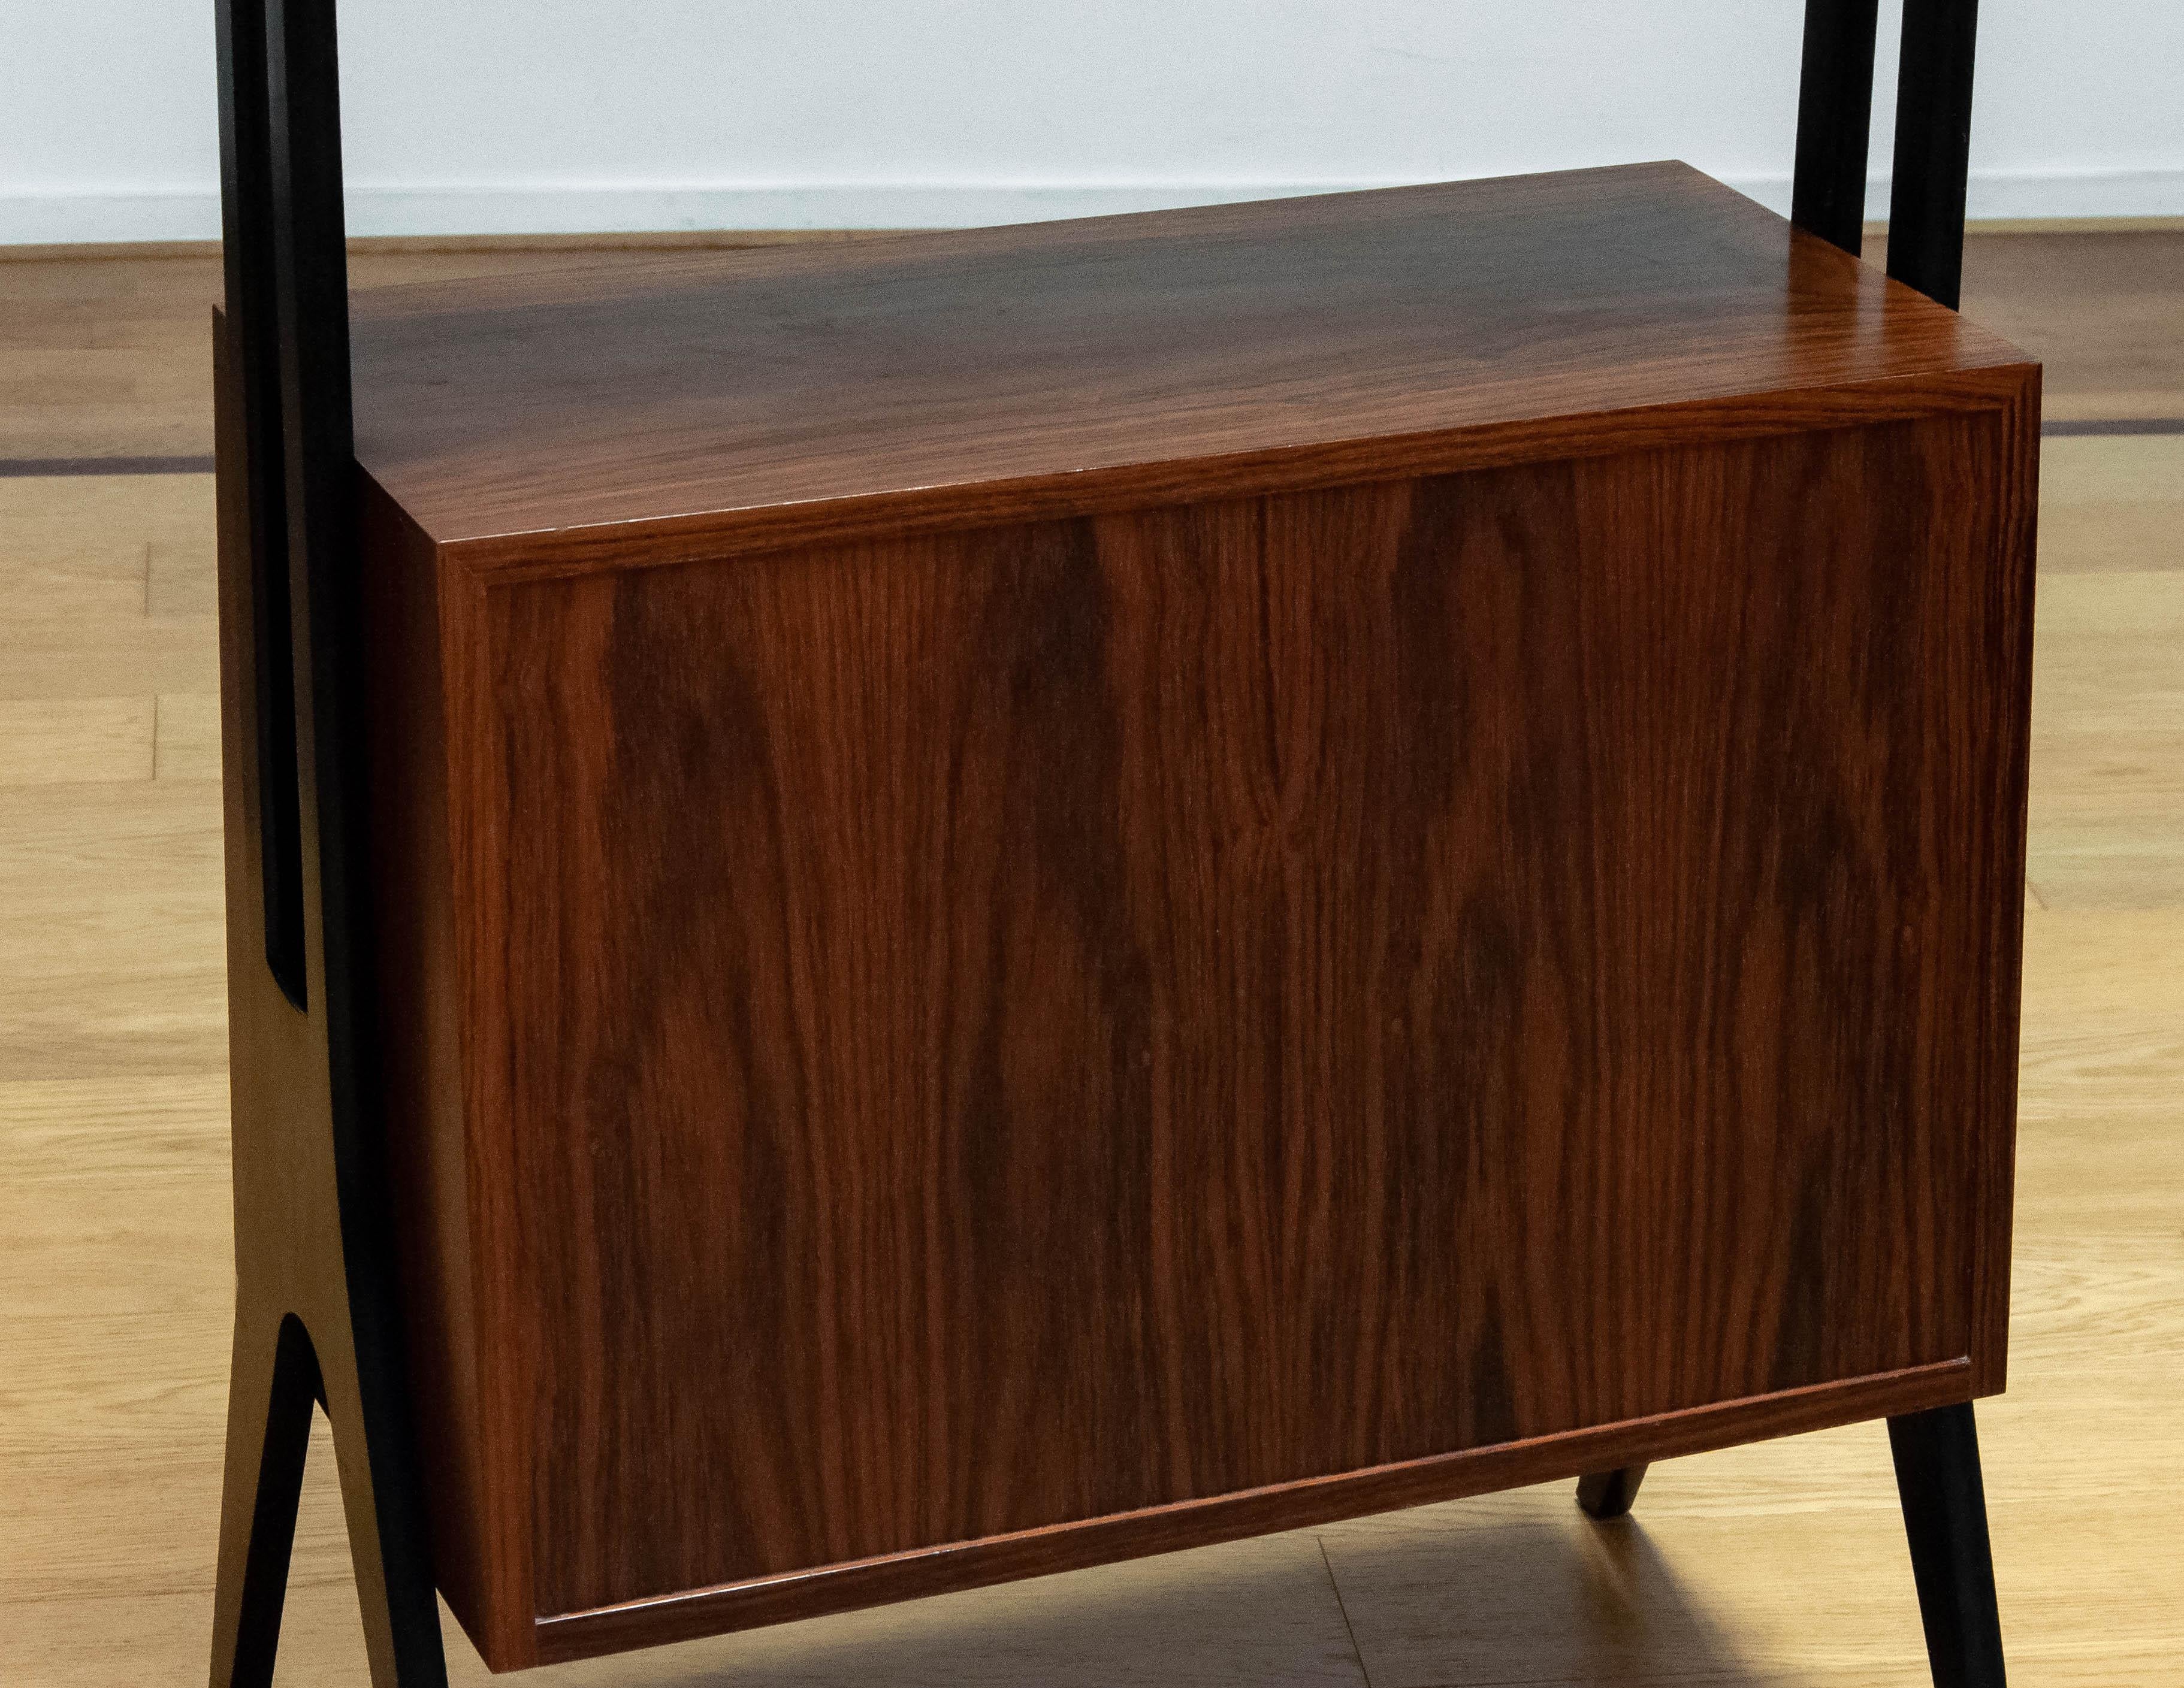 Beech 1950 Rosewood Bookcase Room Divider With Black Lacquered Stands By Treman Sweden